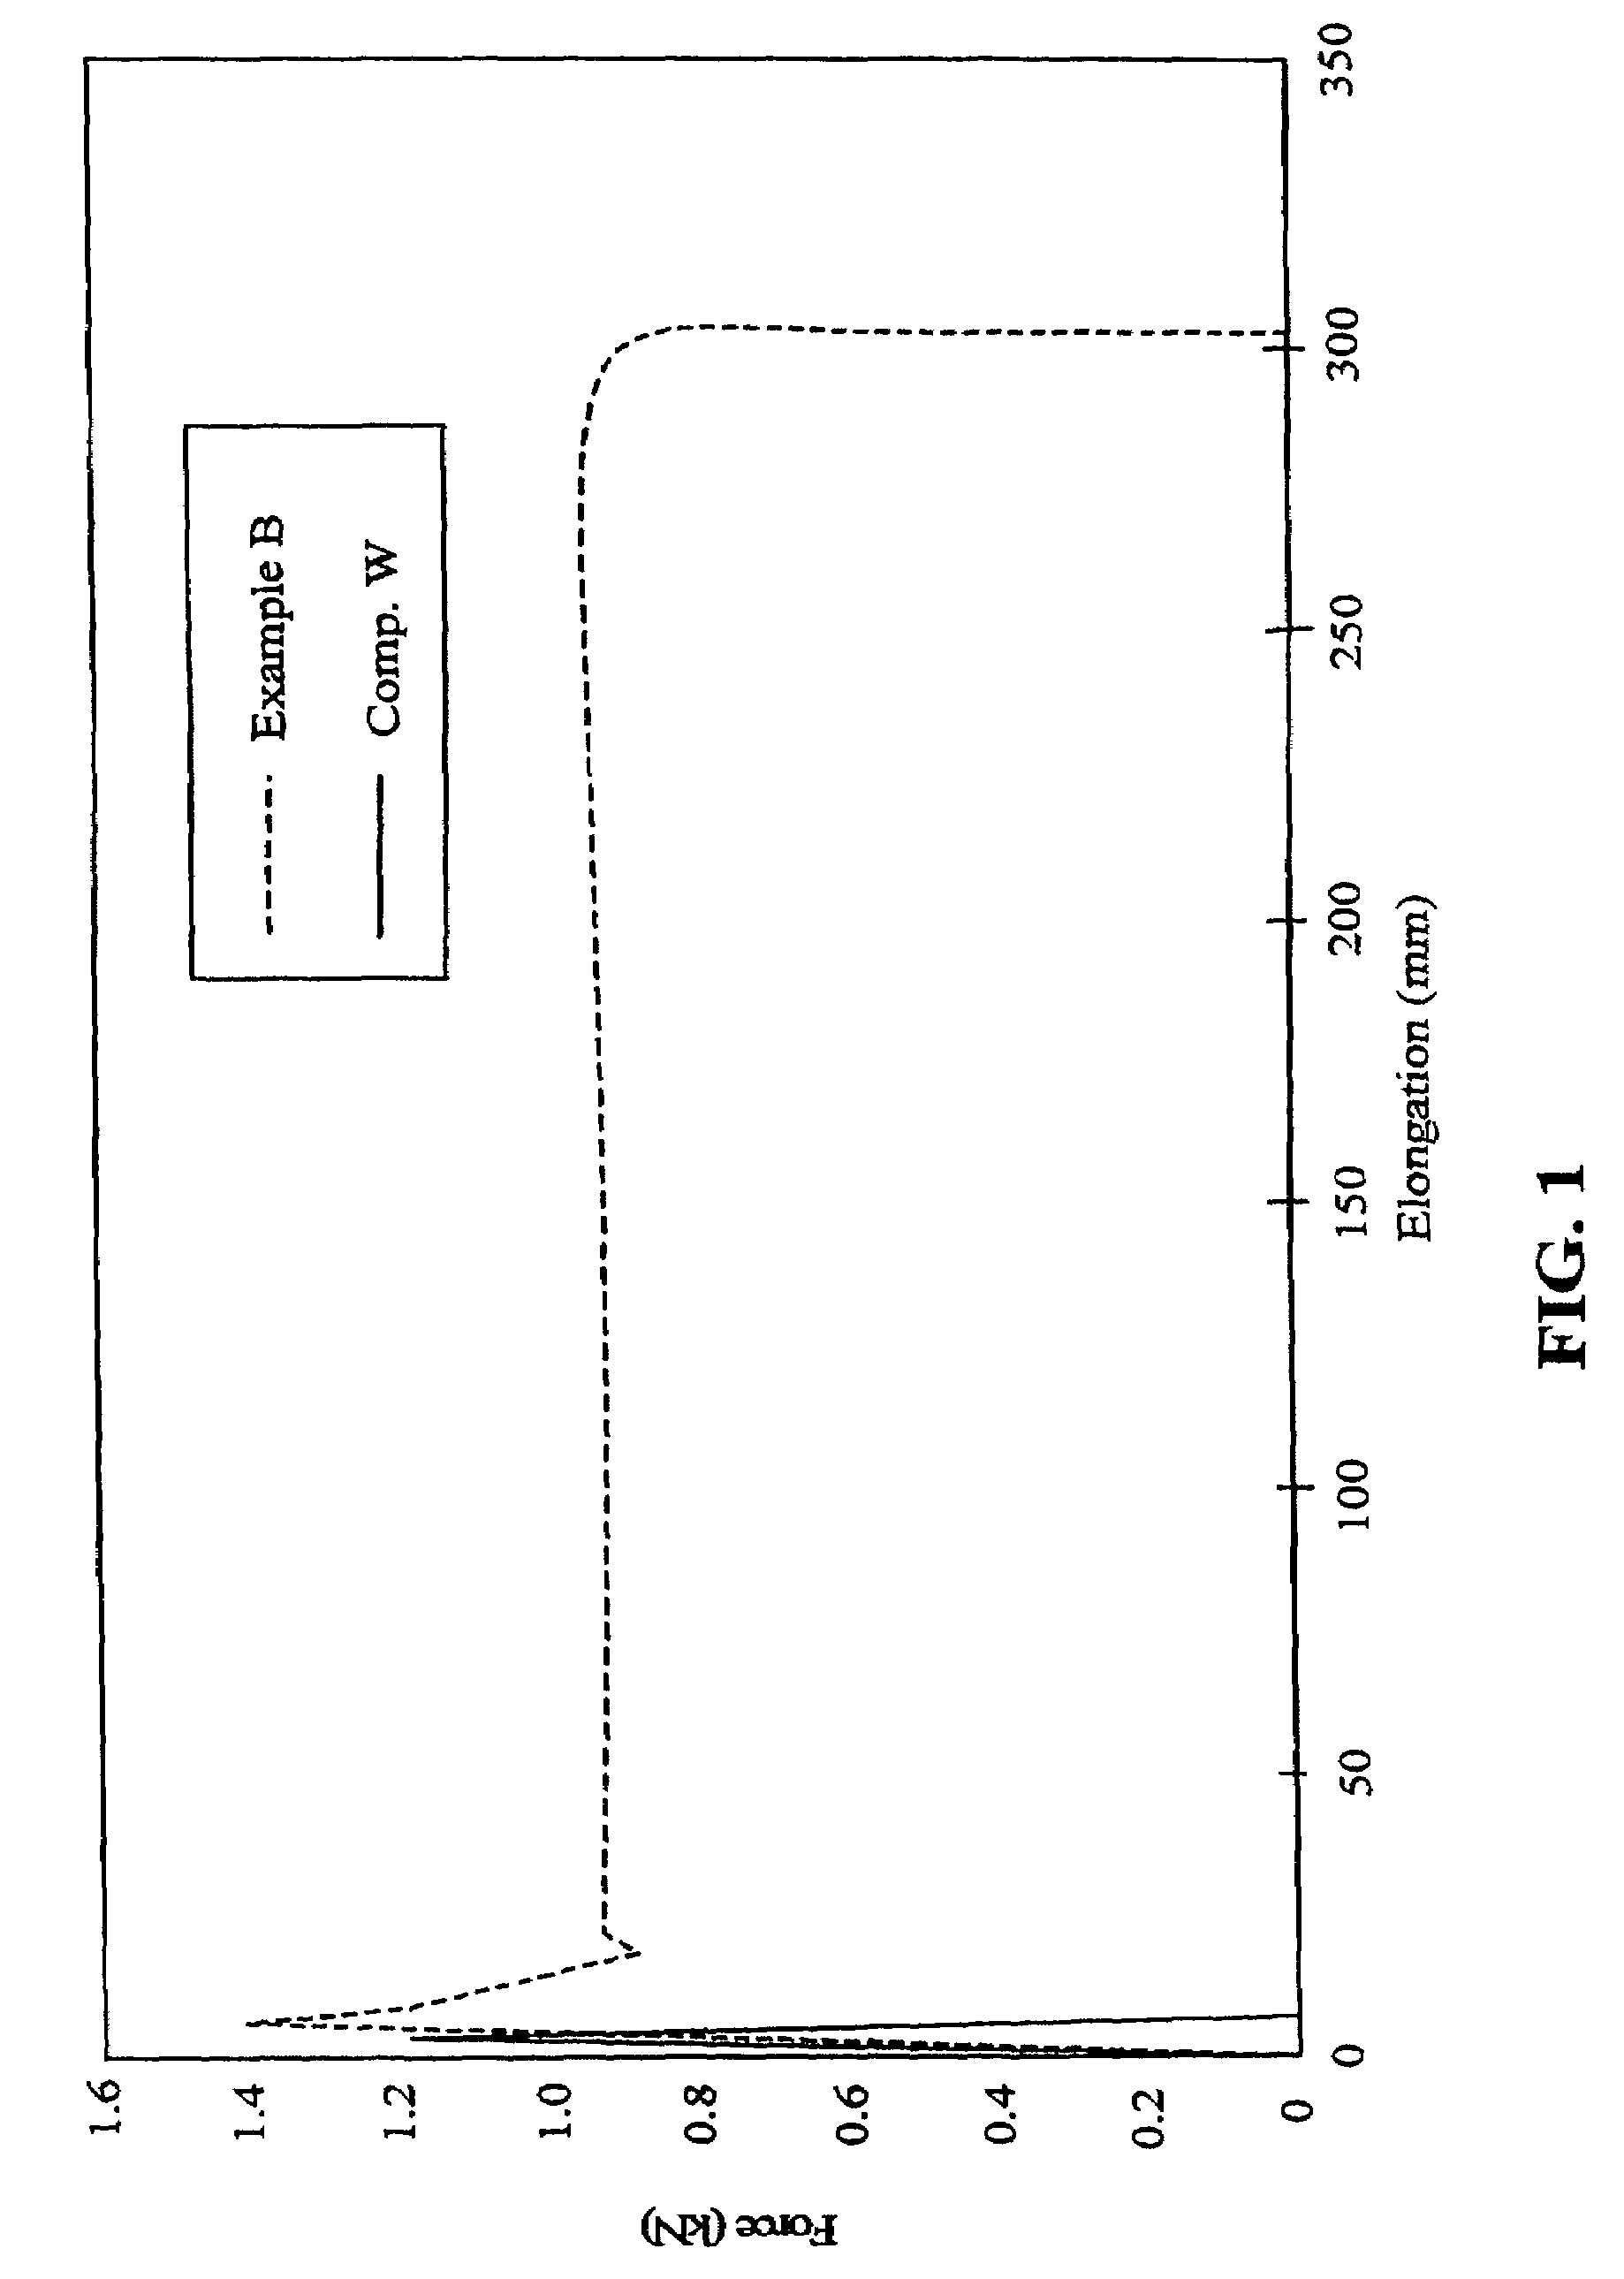 Polymeric nanocomposites comprising epoxy-functionalized graft polymer